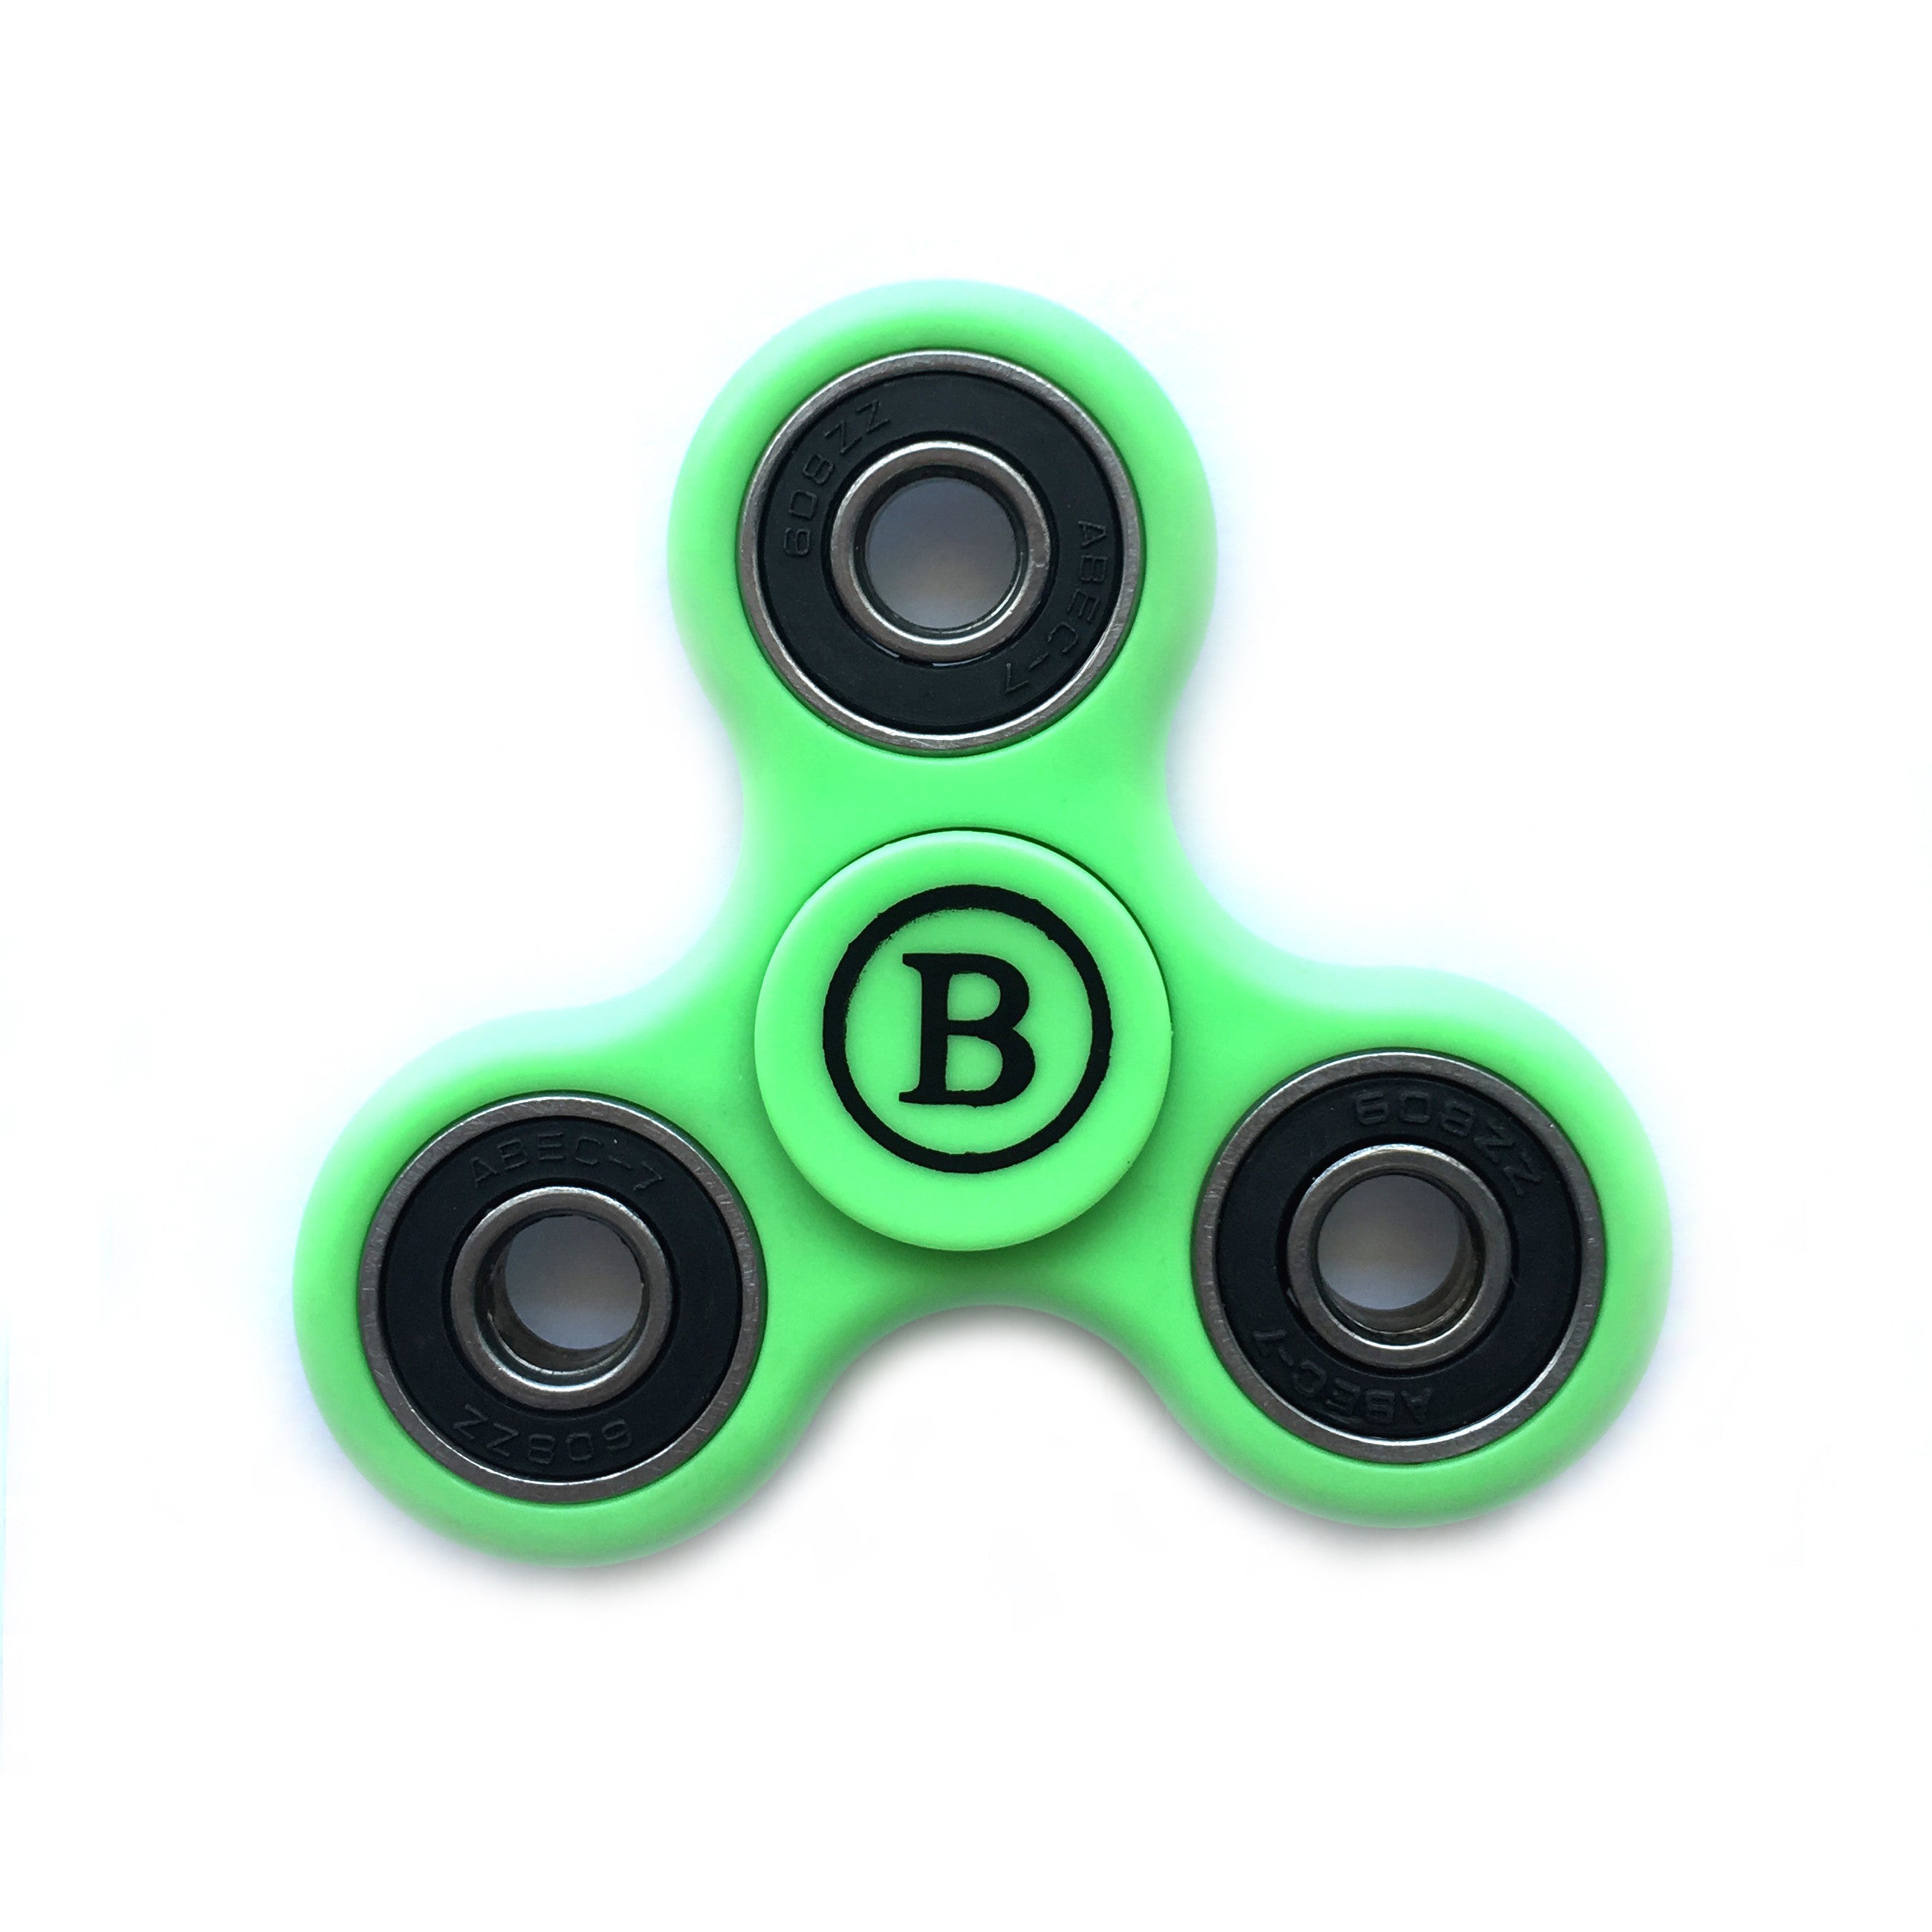 Fidget Hand Spinner High Speed Steel Bearing, Adhd Focus Anxiety Relief Toy - Green